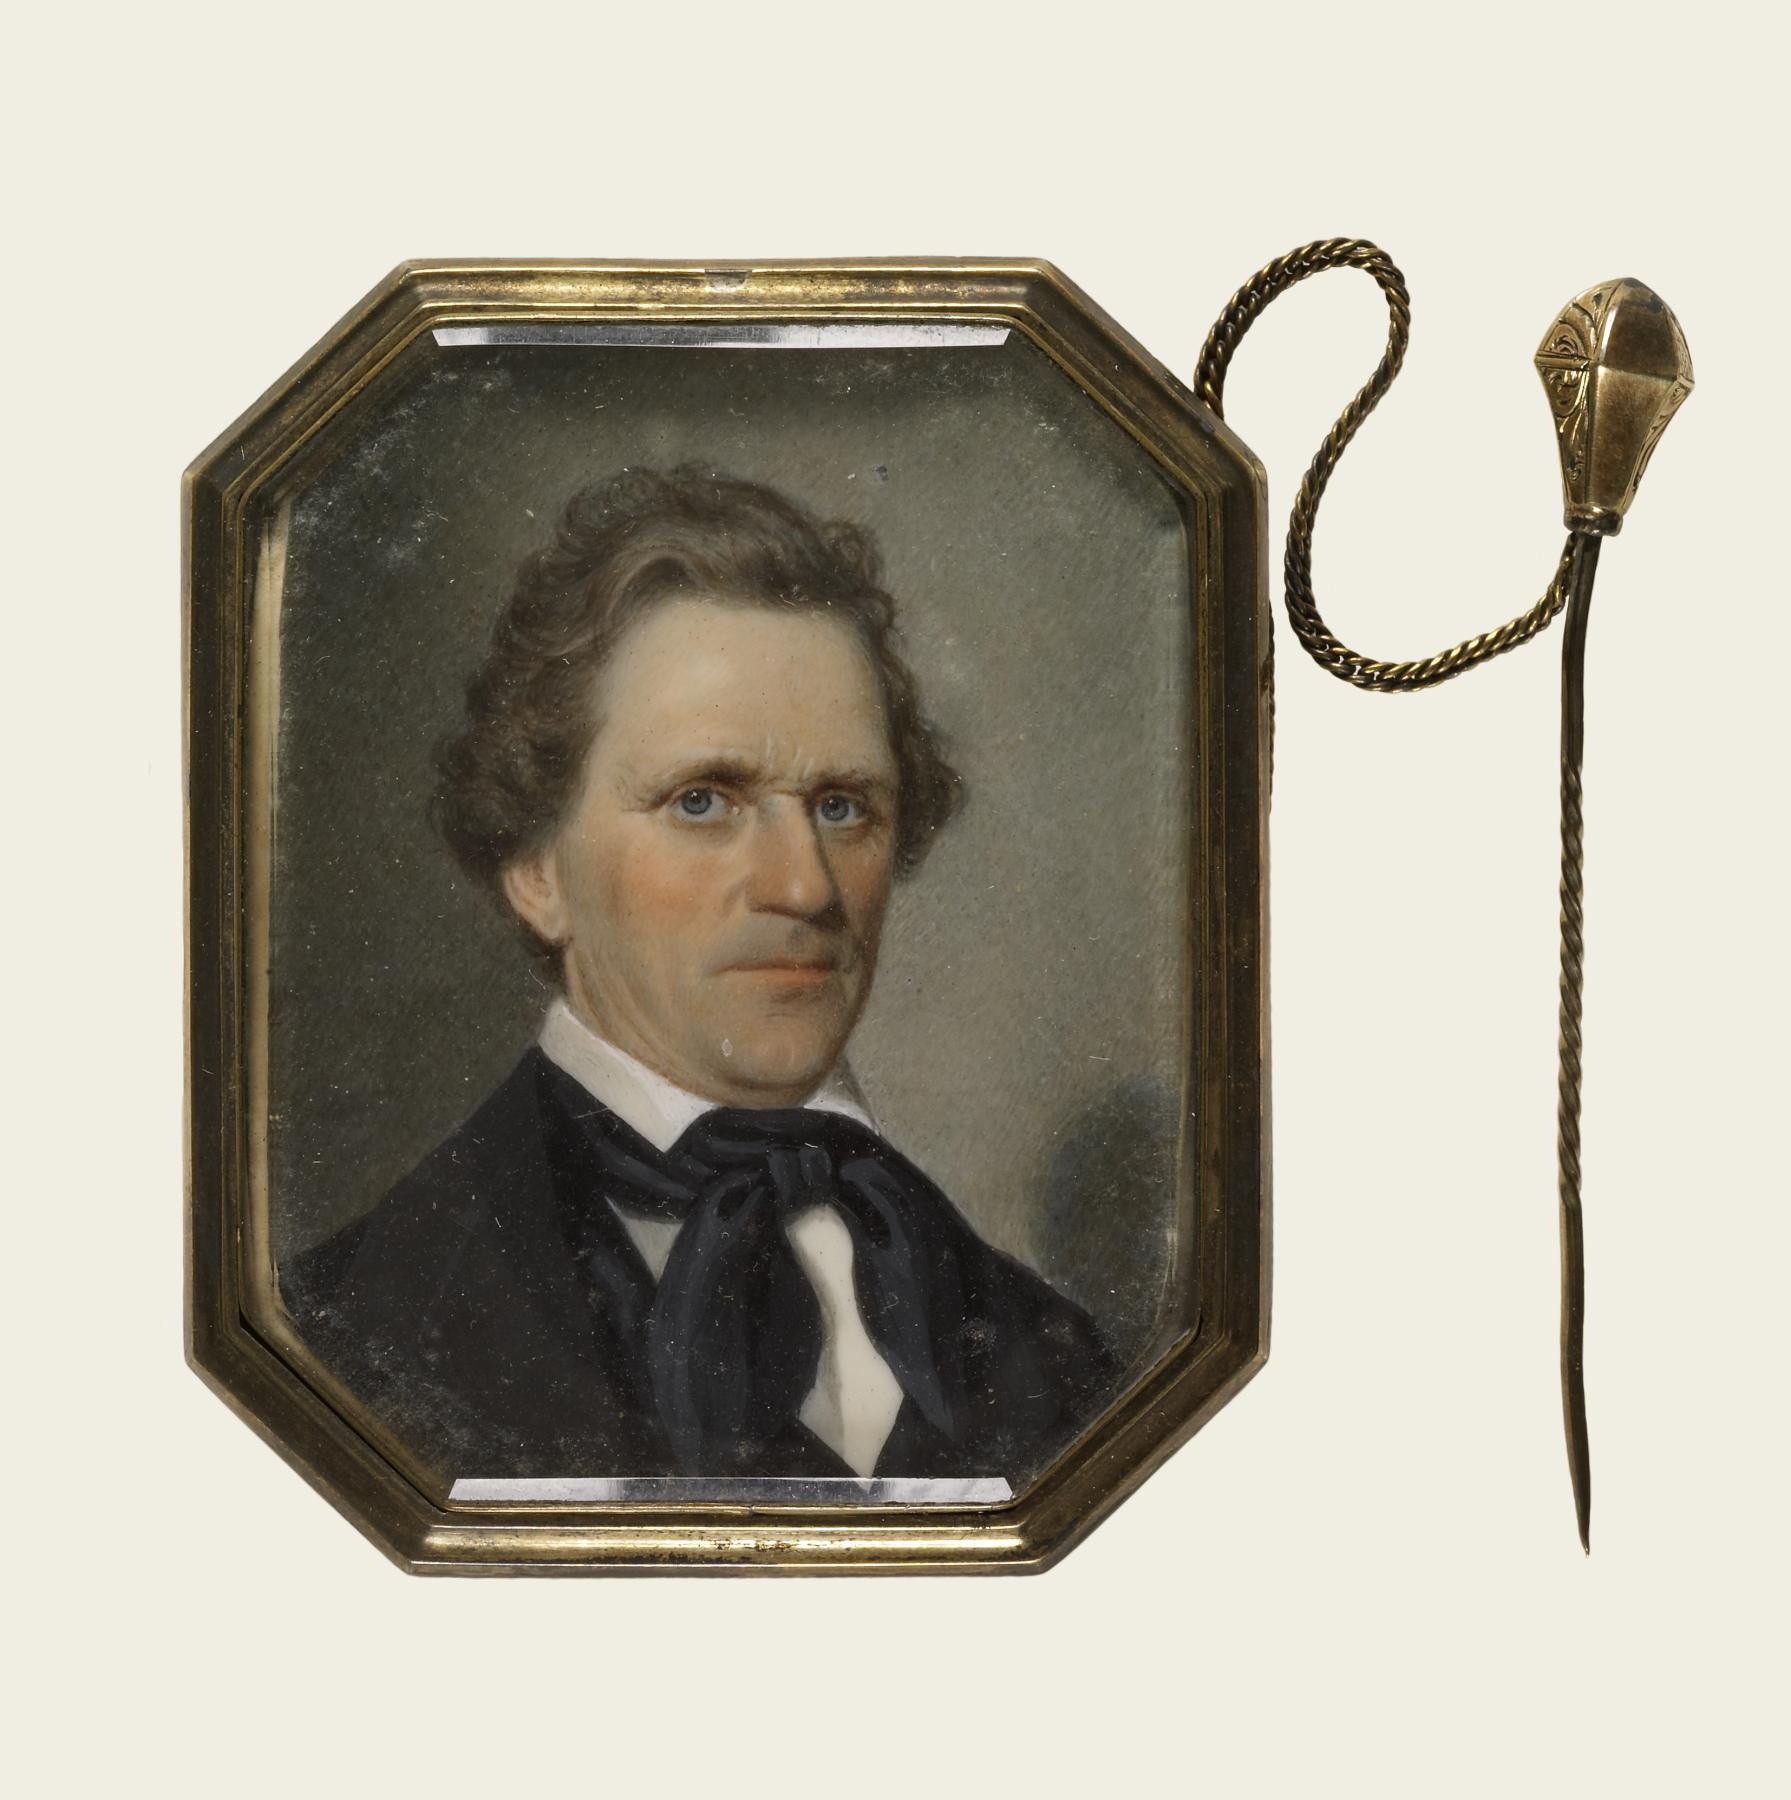 Image for Brooch with Portrait Miniature of a Man